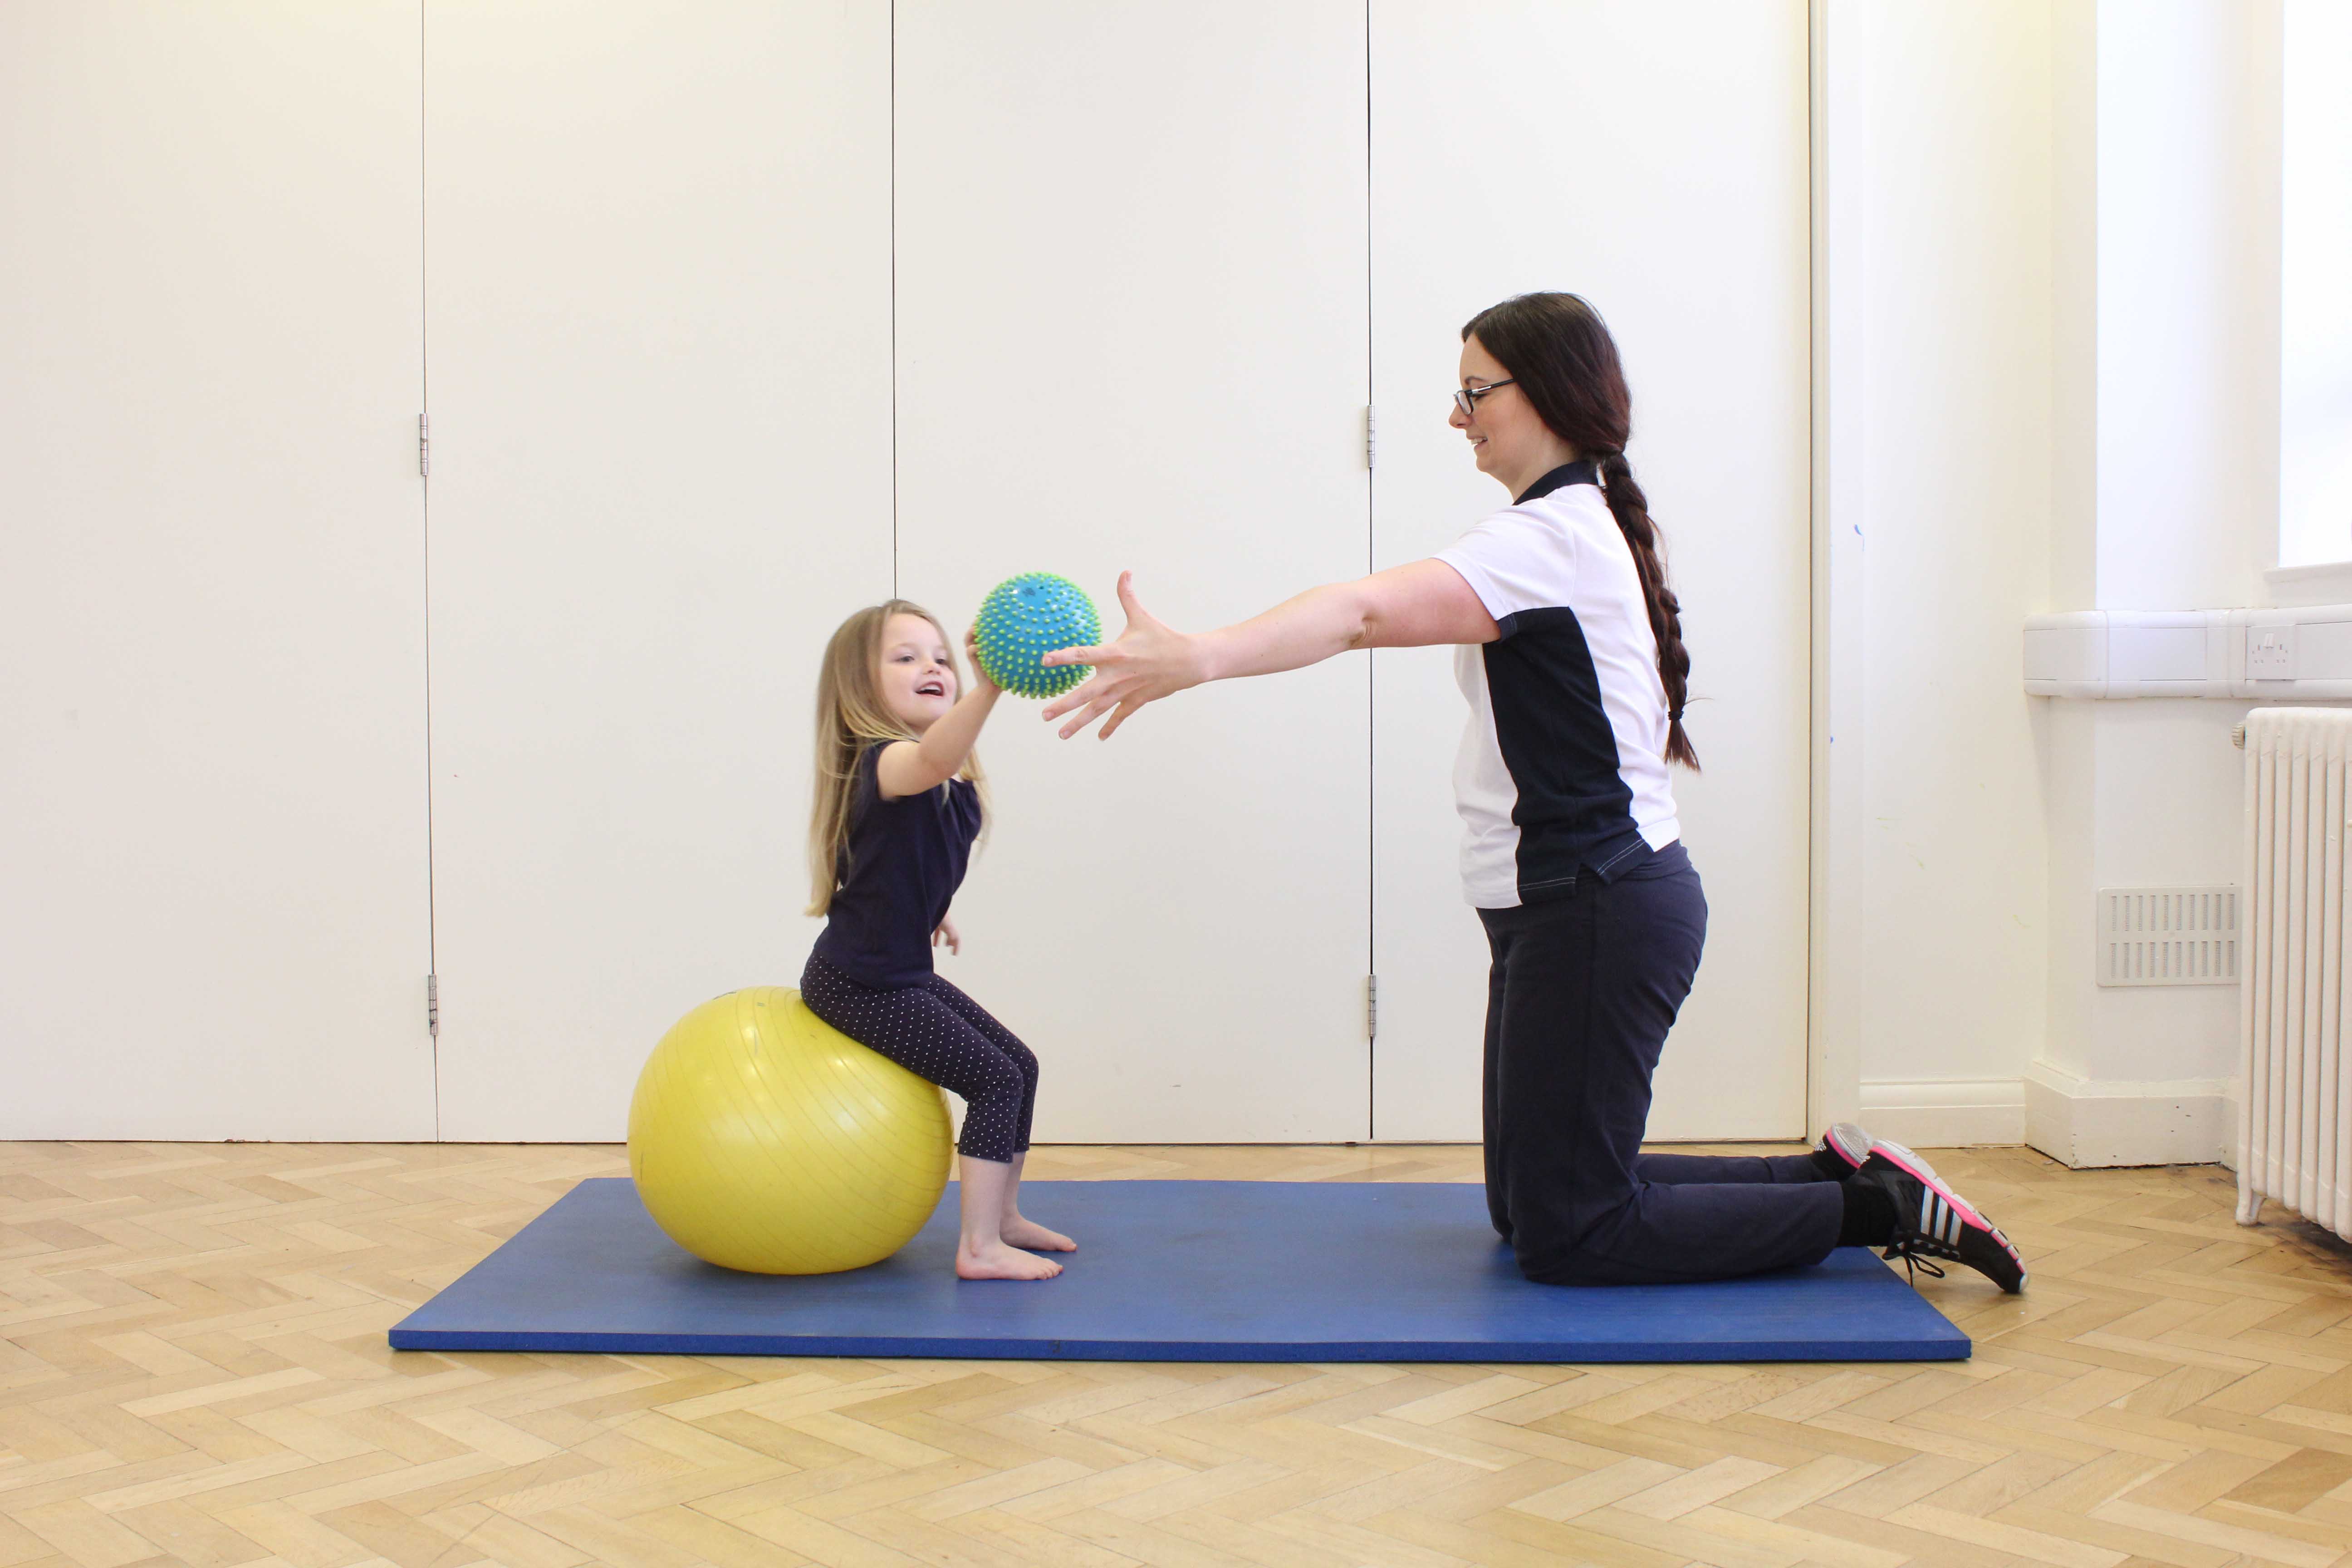 Physiotherapist encouraging increased range of movement with a reaching game.